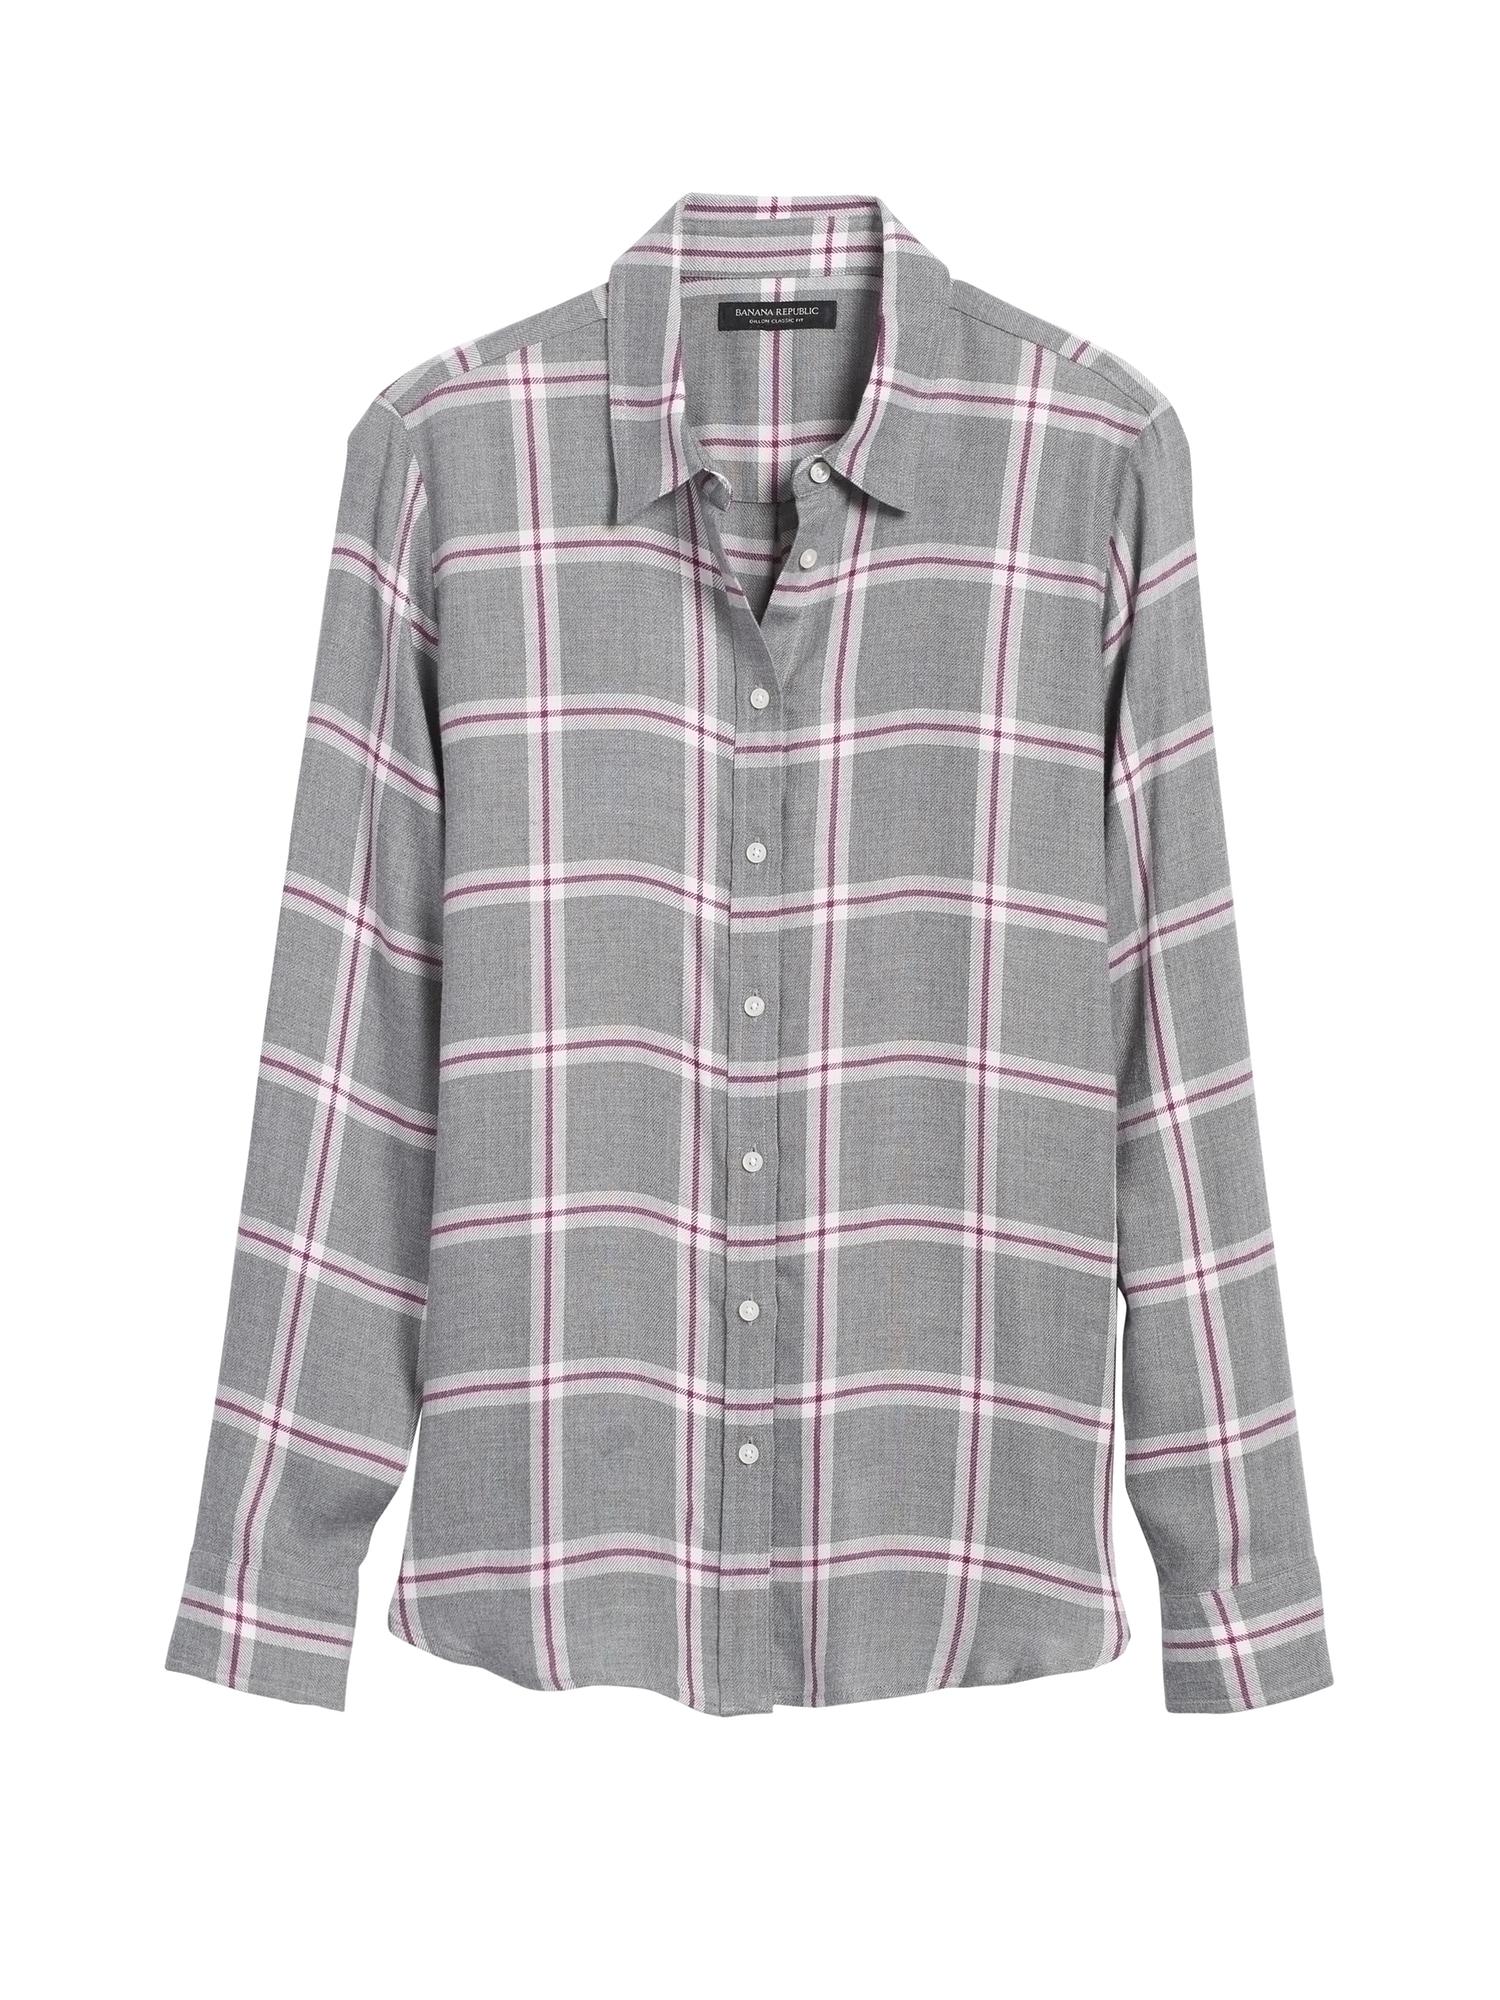 Banana Republic Dillon Classic-fit Flannel Shirt in Gray - Save 42% - Lyst